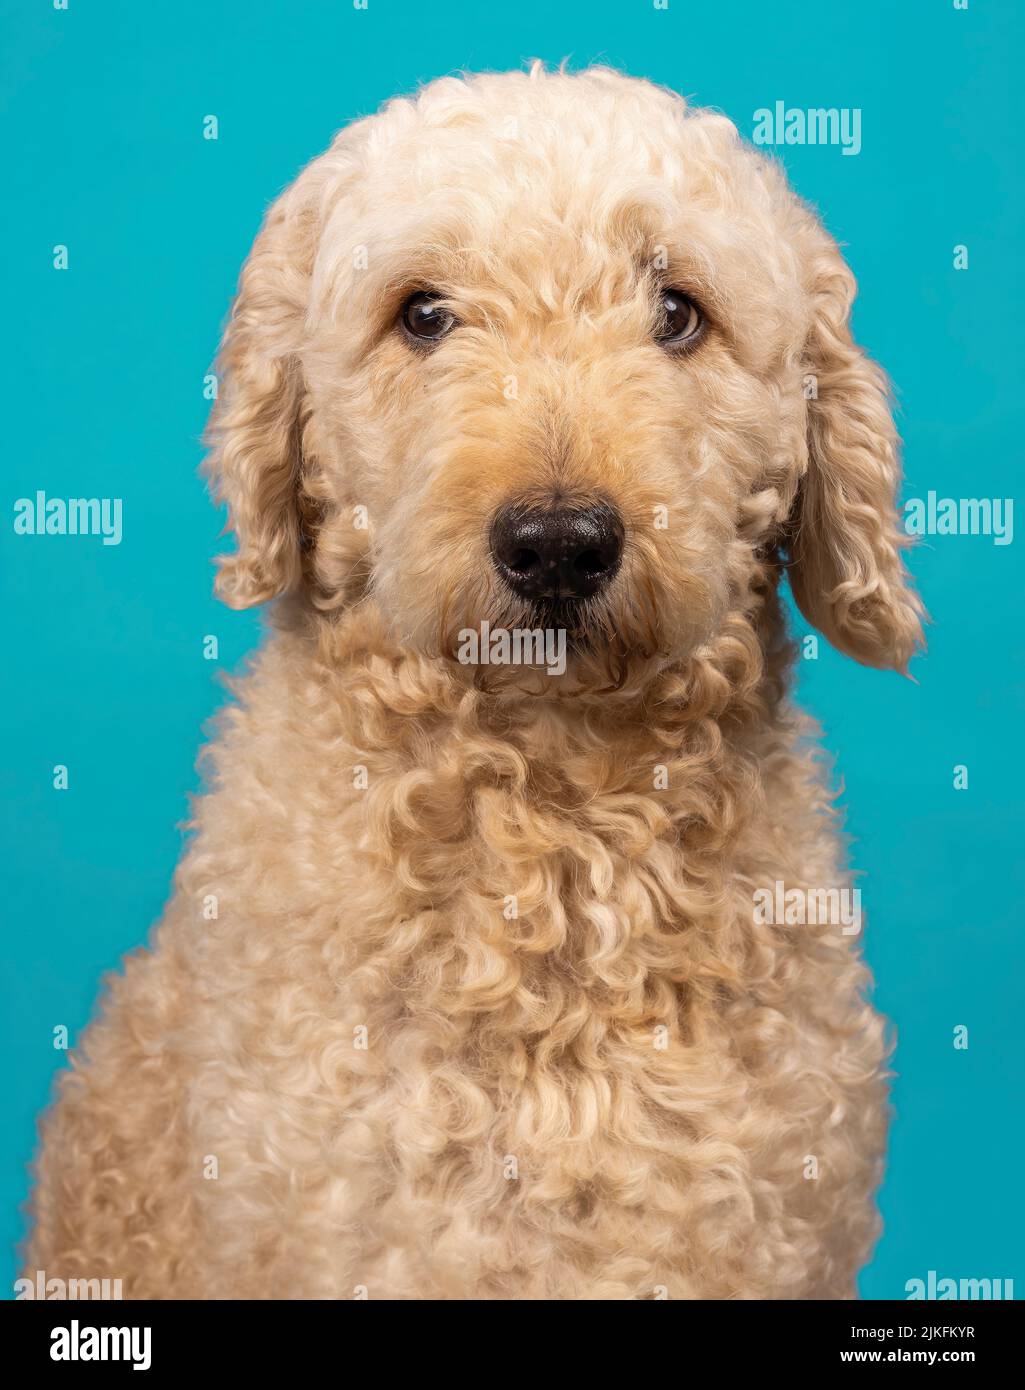 A beautiful beige Labradoodle dog, photographed in a studio and looking towards the camera. Photographed against a plain turquoise background Stock Photo